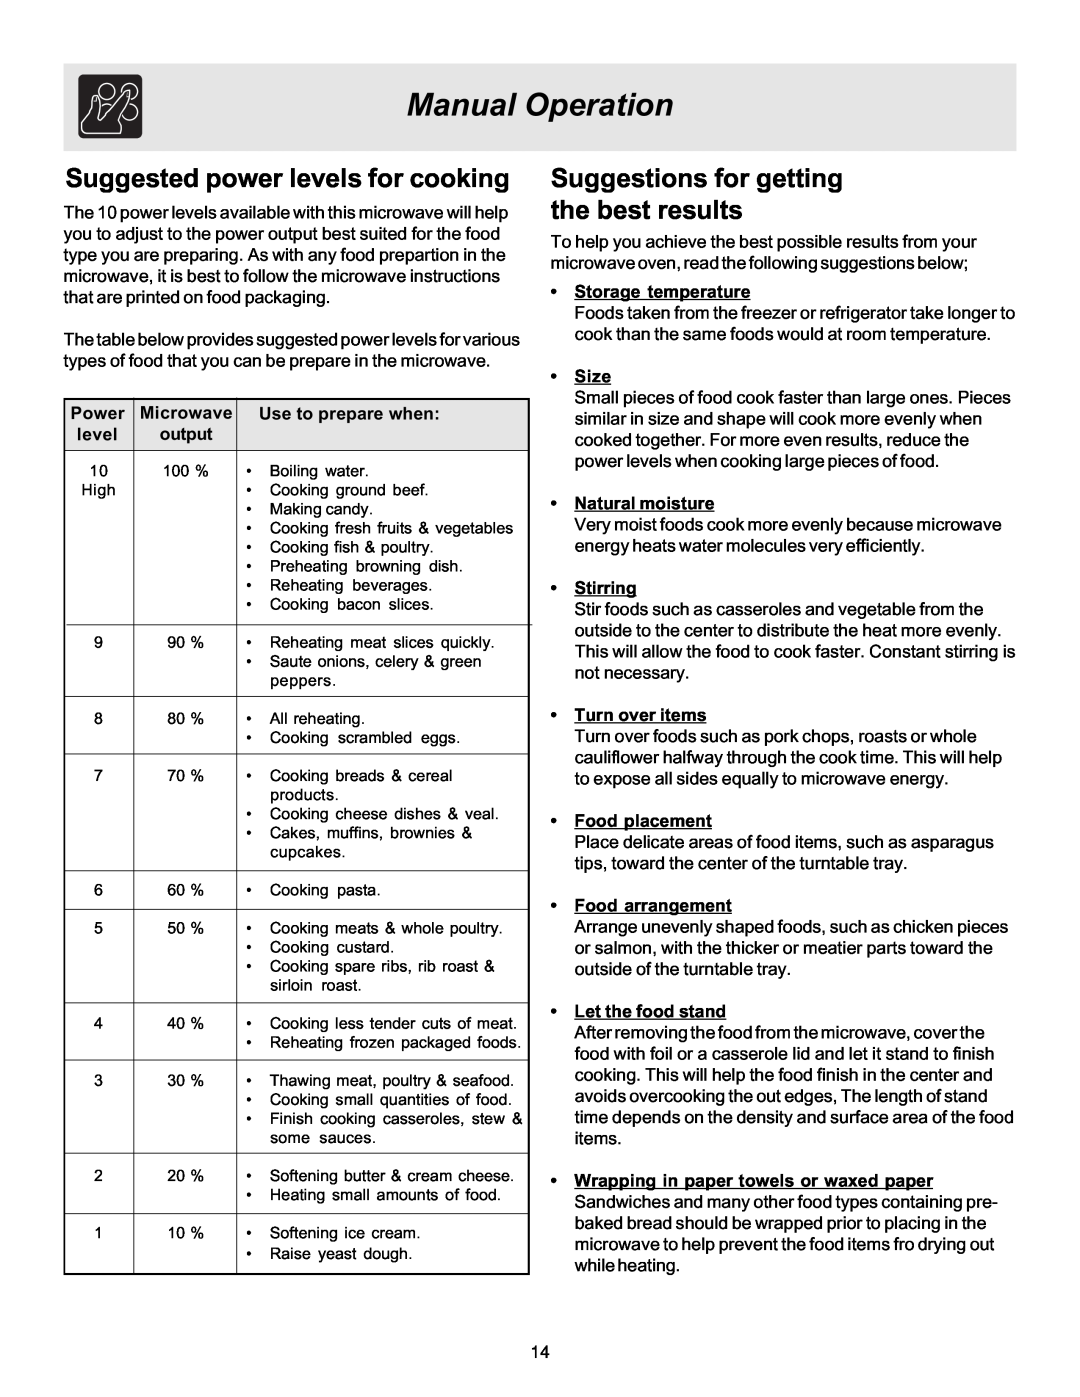 Frigidaire 316495058 manual Suggested power levels for cooking, Suggestions for getting the best results, Manual Operation 